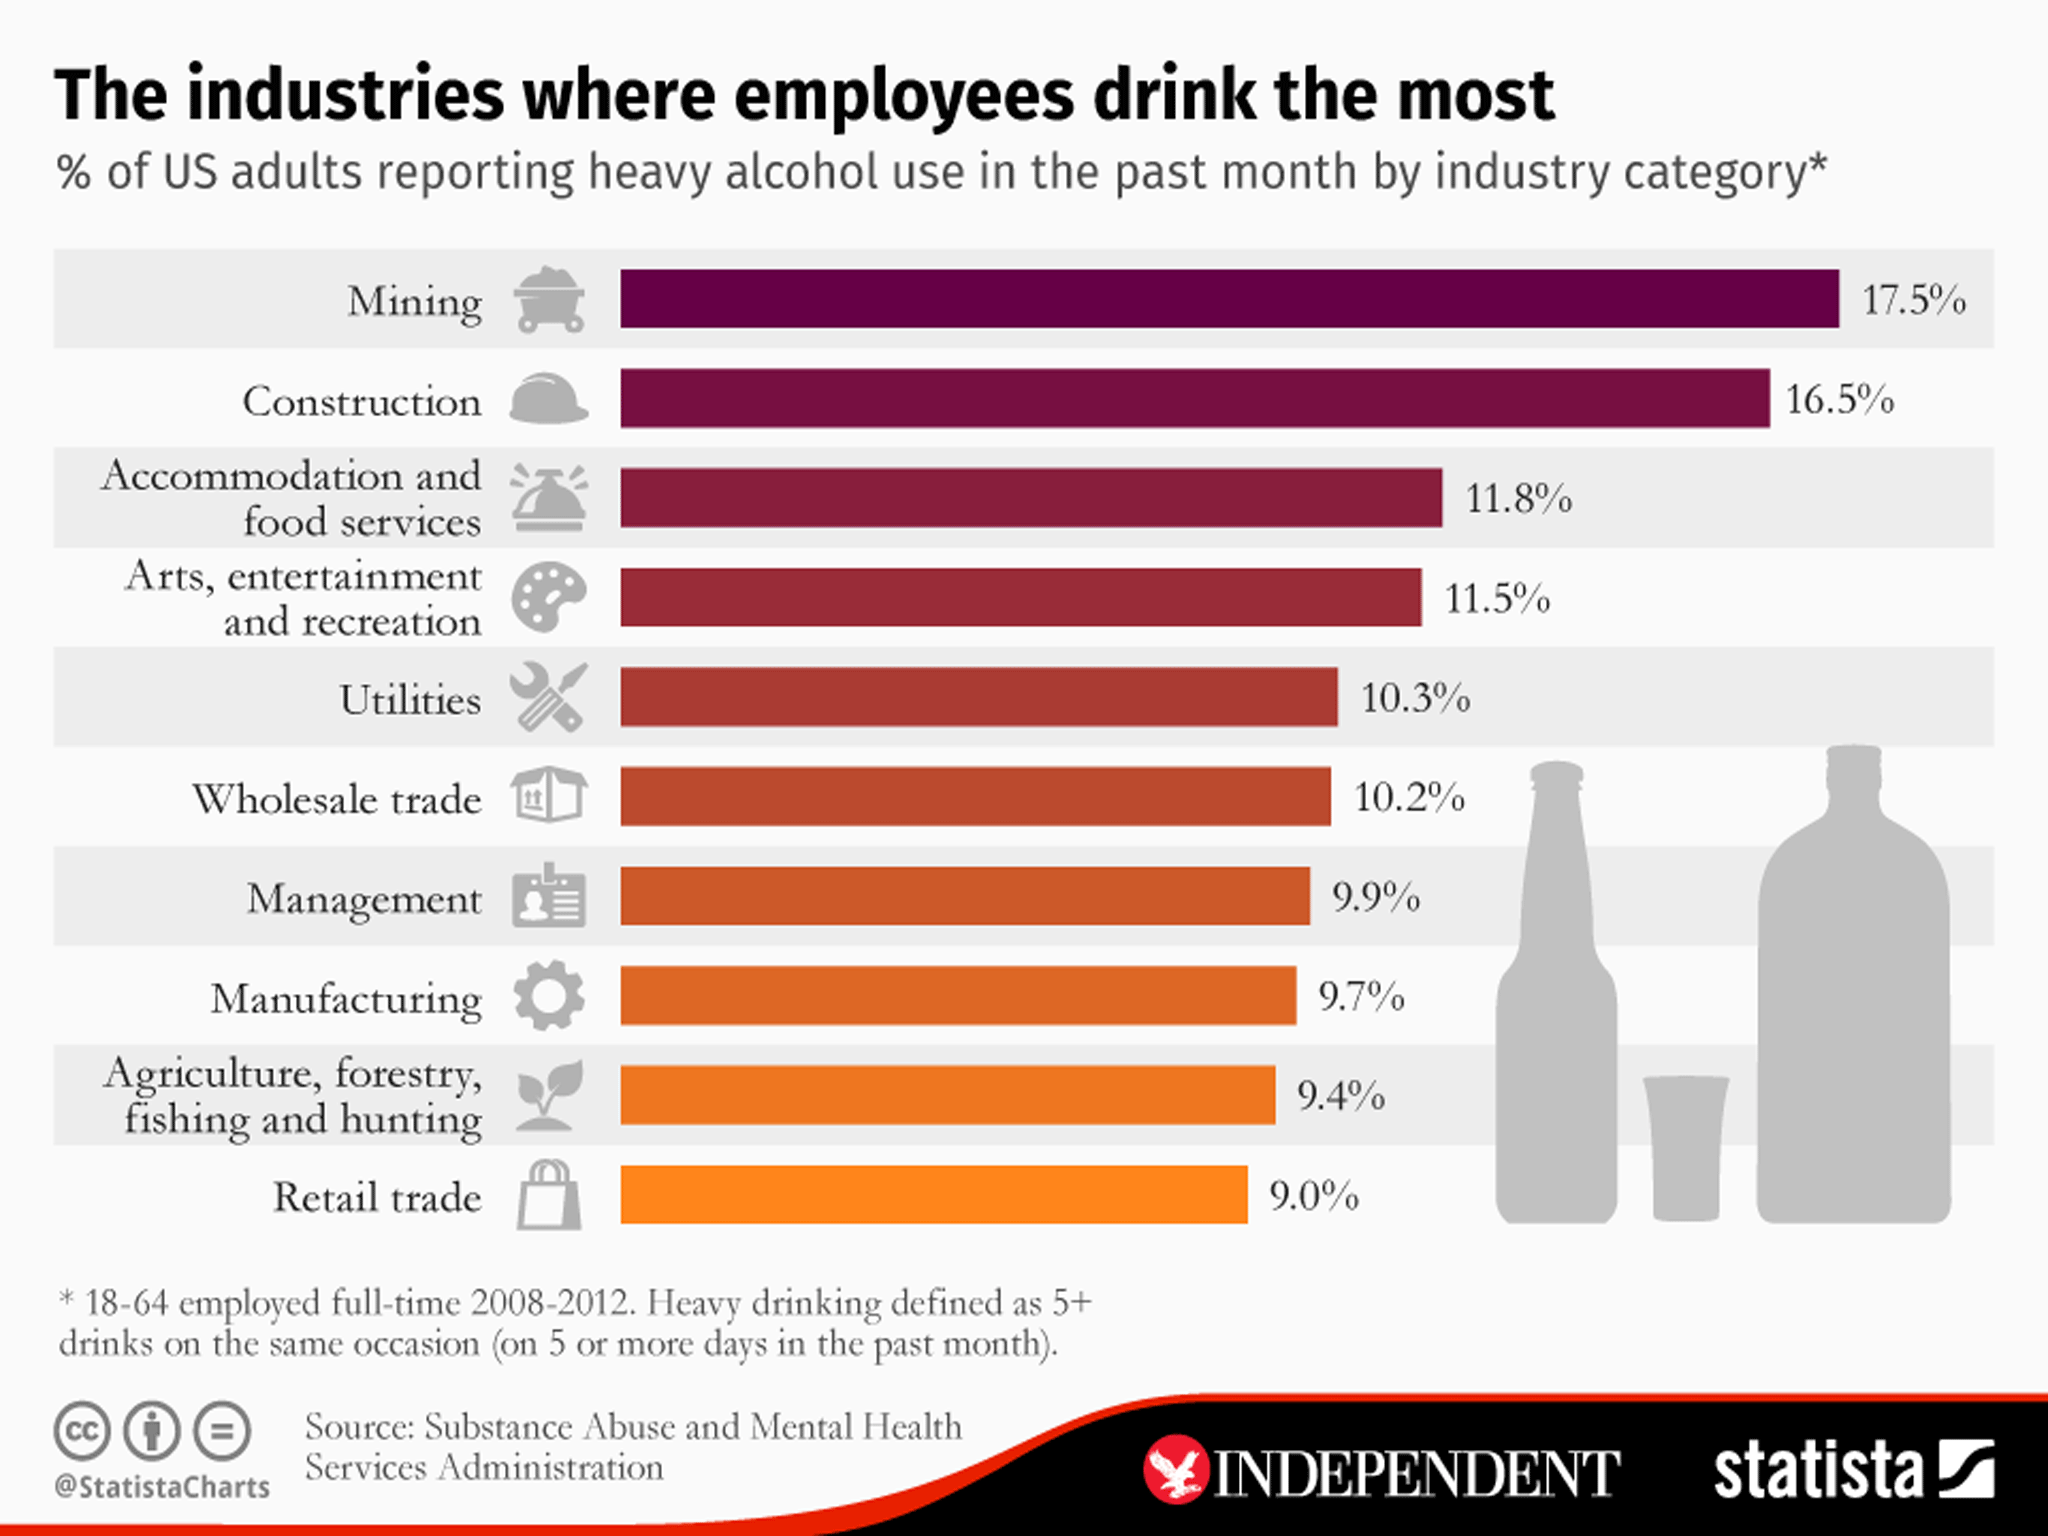 The research showed the industries in the US which drank the most alcohol on average